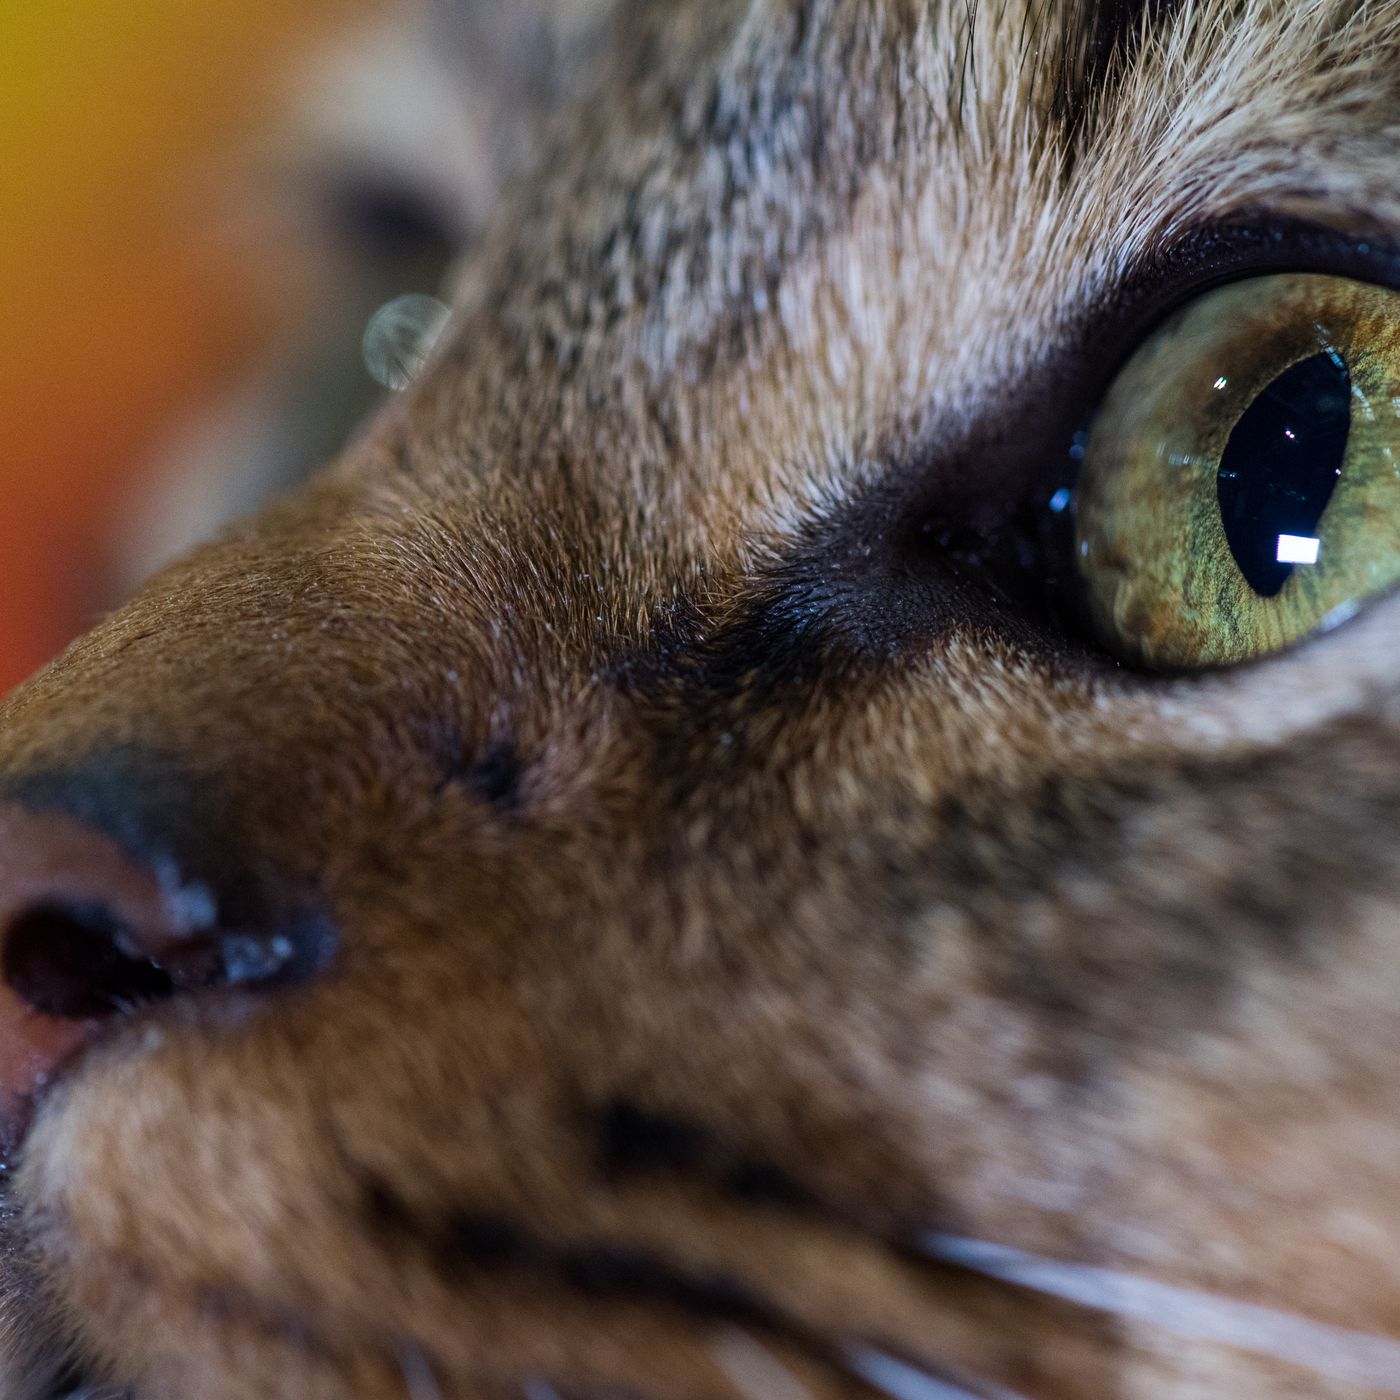 Cat Person The Uproar Over The New Yorker Short Story Explained Vox